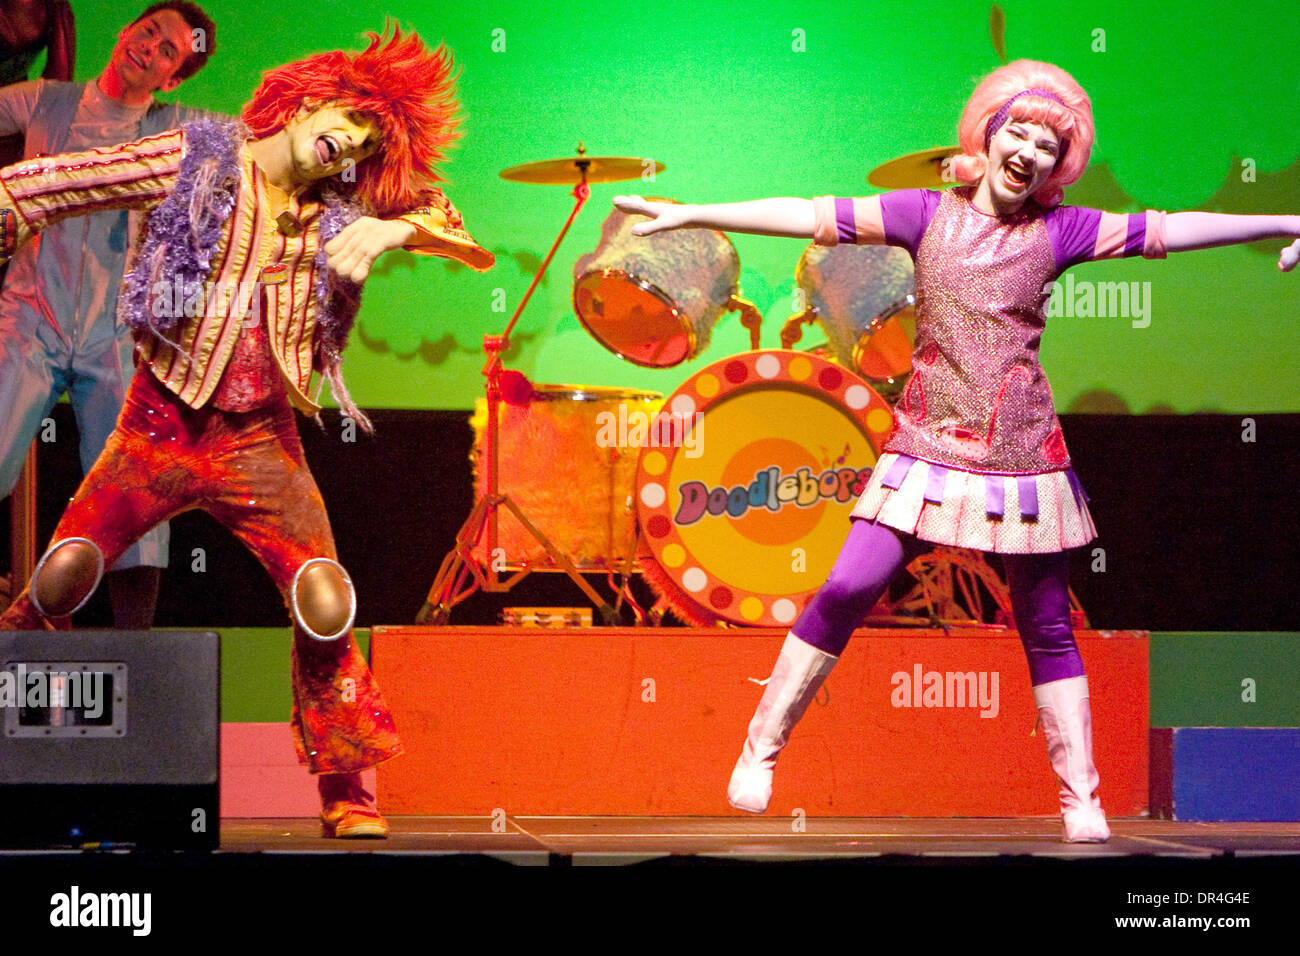 Feb 11, 2009 - Oshawa, Ontario, Canada - Playhouse Disney's featured Doodle Bops - DeeDee Doodle in pink, Moe Doodle in orange and Rooney Doodle in blue along with the Doodle Bop dancers - deliver humor, comedy and wonderful music geared to be a young child's (typically 3 to 6 yrs of age) first rock concert experience. The Doodle Bops perform in their Doodle Bops LIVE concert tour  Stock Photo